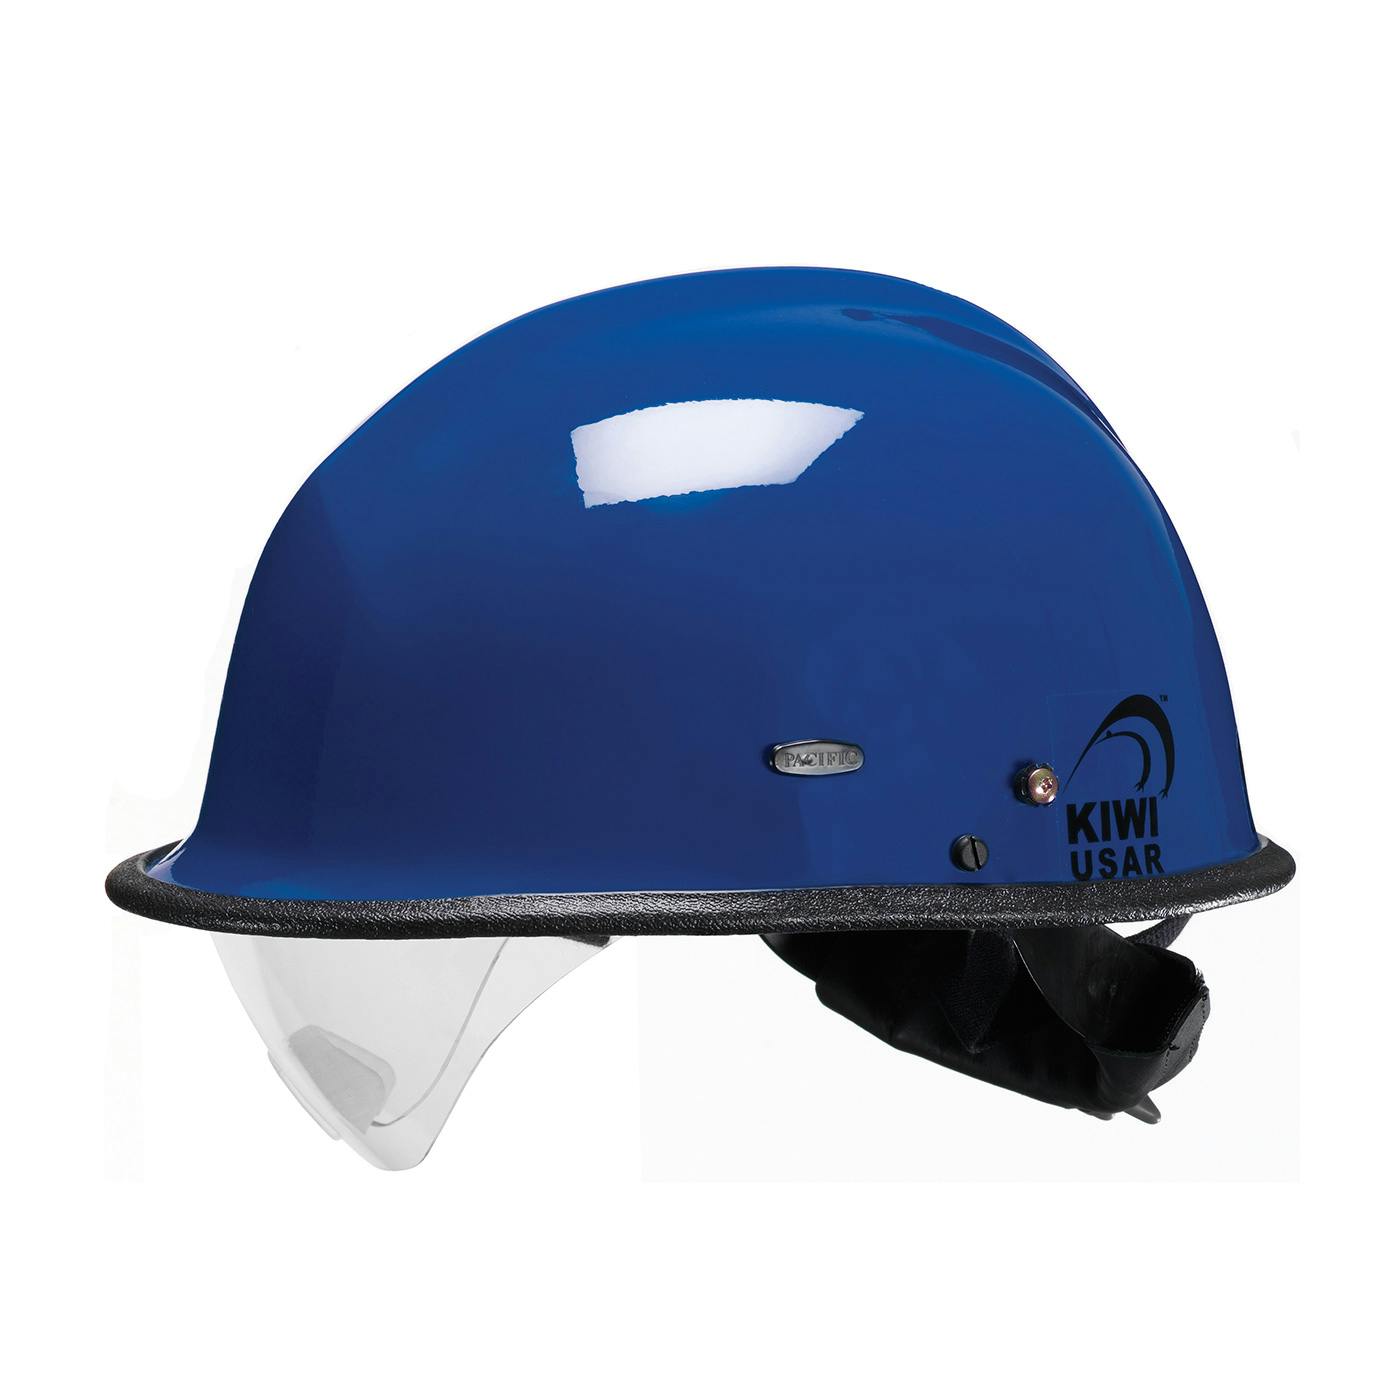 R3V4 KIWI USAR™ Rescue Helmet with ESS Goggle Mounts and Retractable Eye Protector (804-340X)